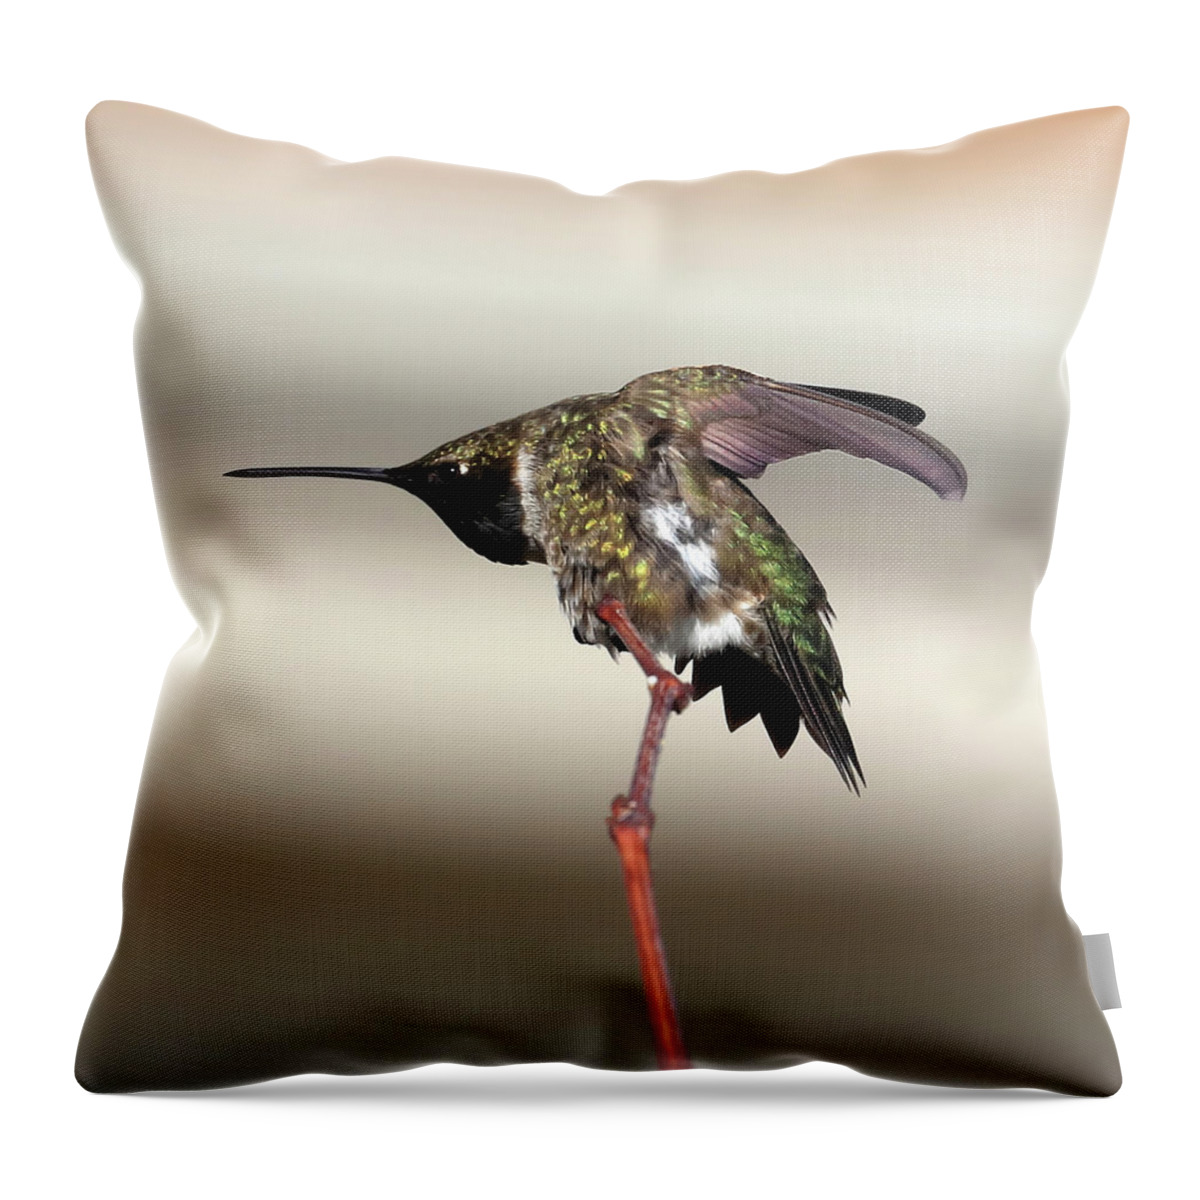 Hummingbird Throw Pillow featuring the photograph The Guard by Shane Bechler